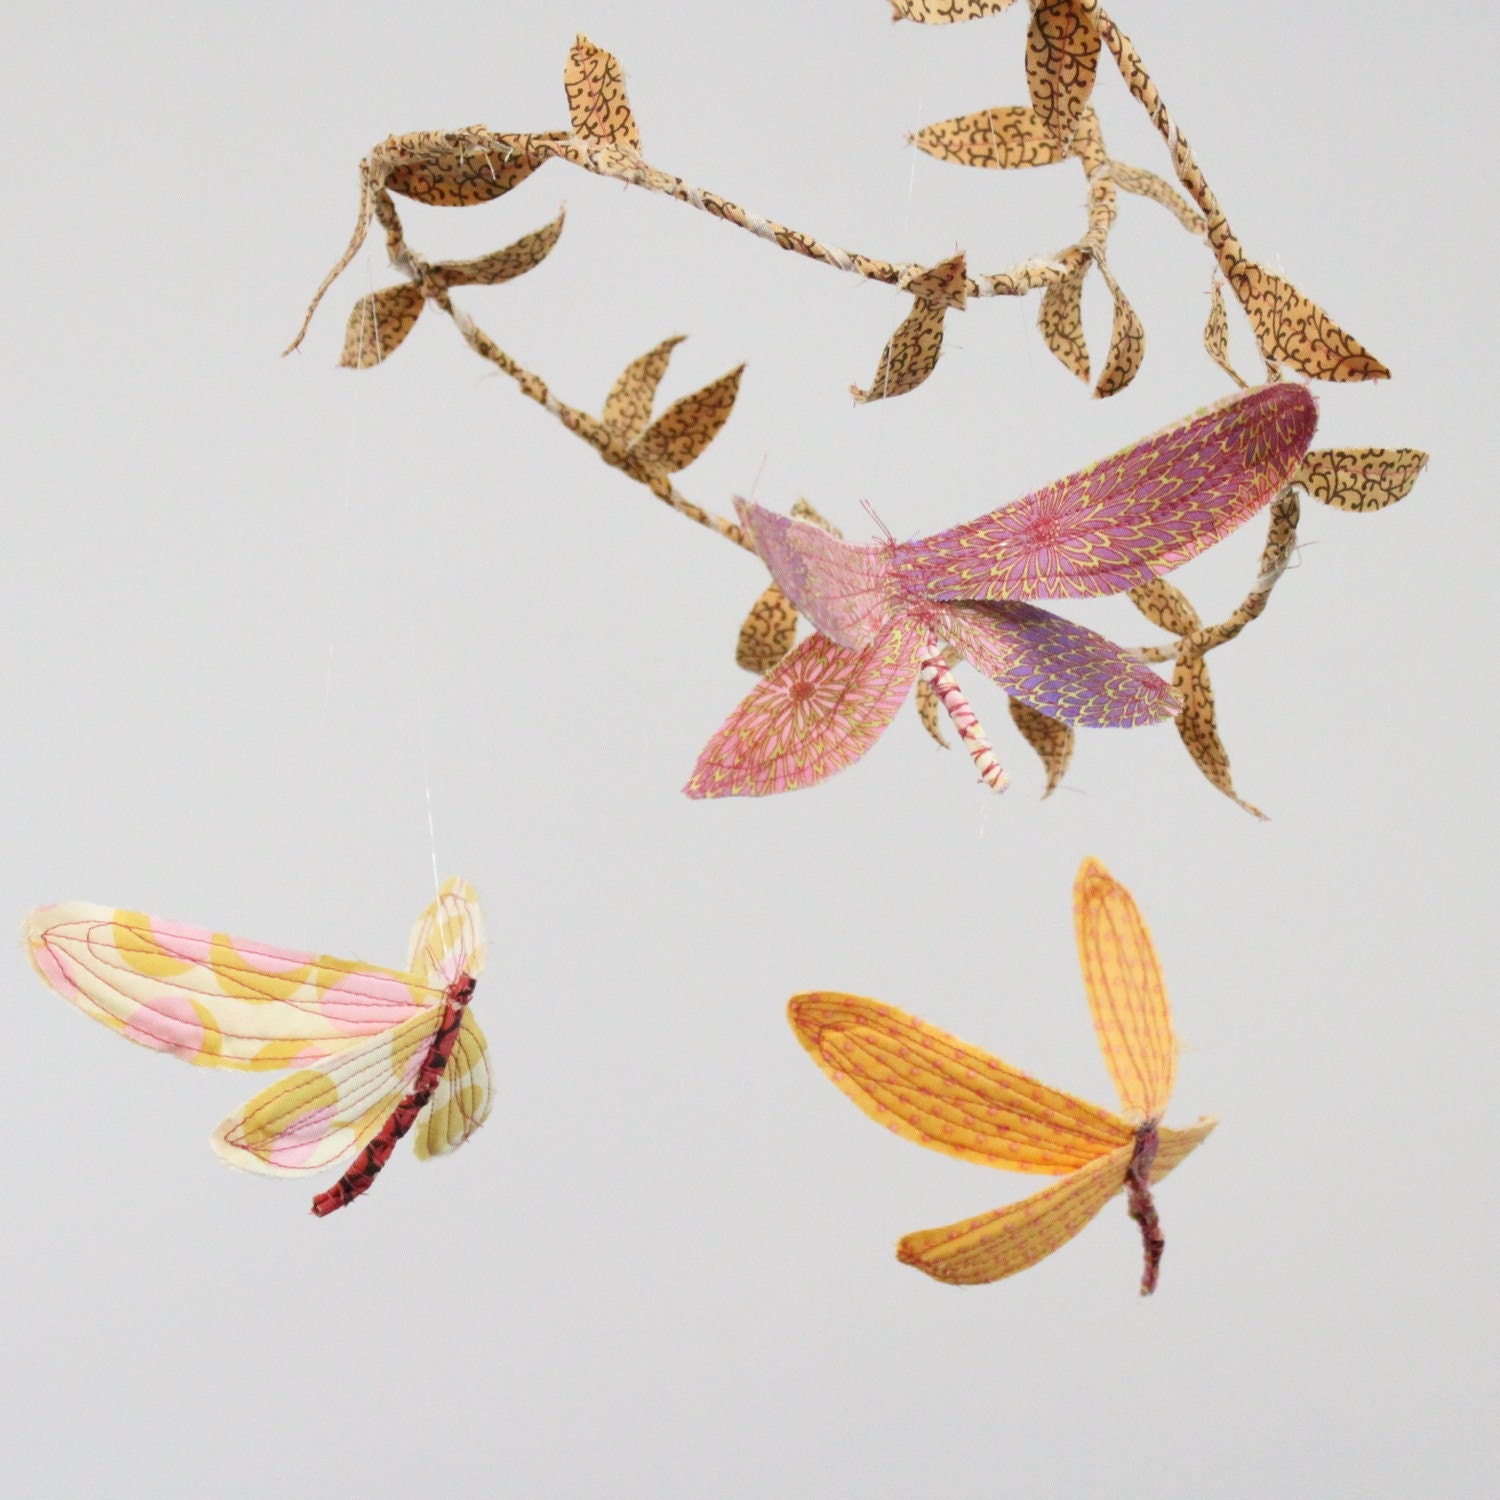 3 dragonflies dream of spring - fabric mobile in gold, sunny yellow, raspberry pink, lilac, and chocolate brown